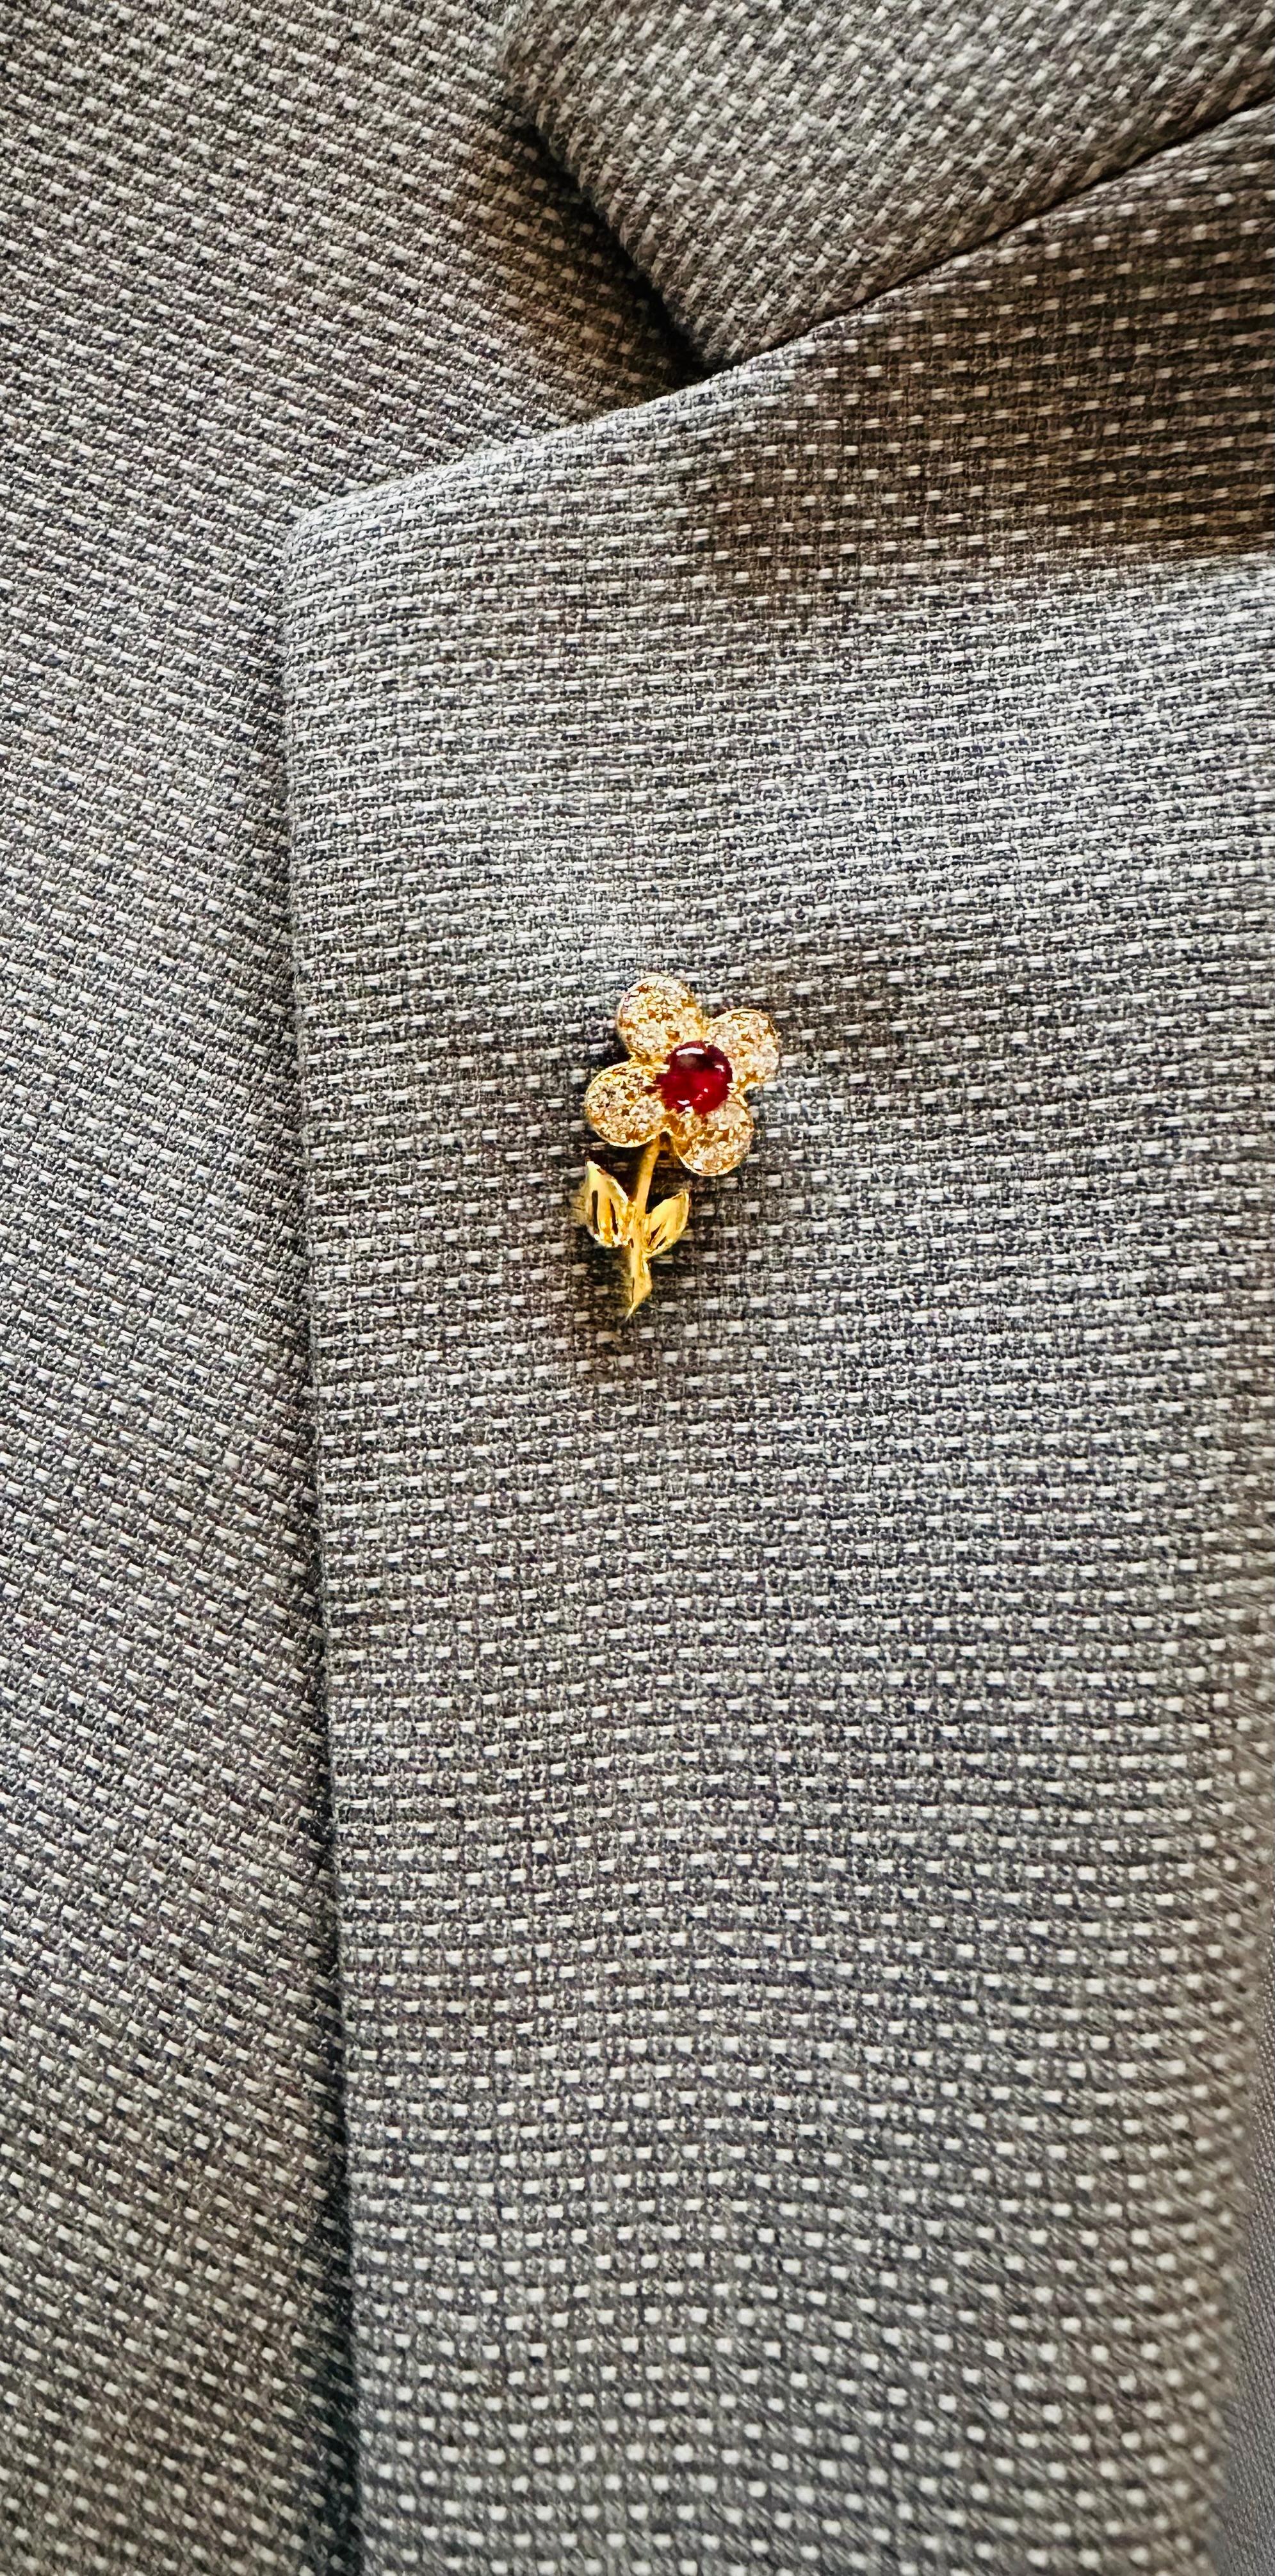 Van Cleef & Arpels Lapel Pin
Cabochon Cut Red Ruby Est .50 cts  
16 Brilliant Cut Diamonds .50 cts
Cute little flower pen 20 x 10 mm. 
Hallmarked VCA
French Eagles head
Workshop marks
Numbered B1 2066–12. Circa 2015